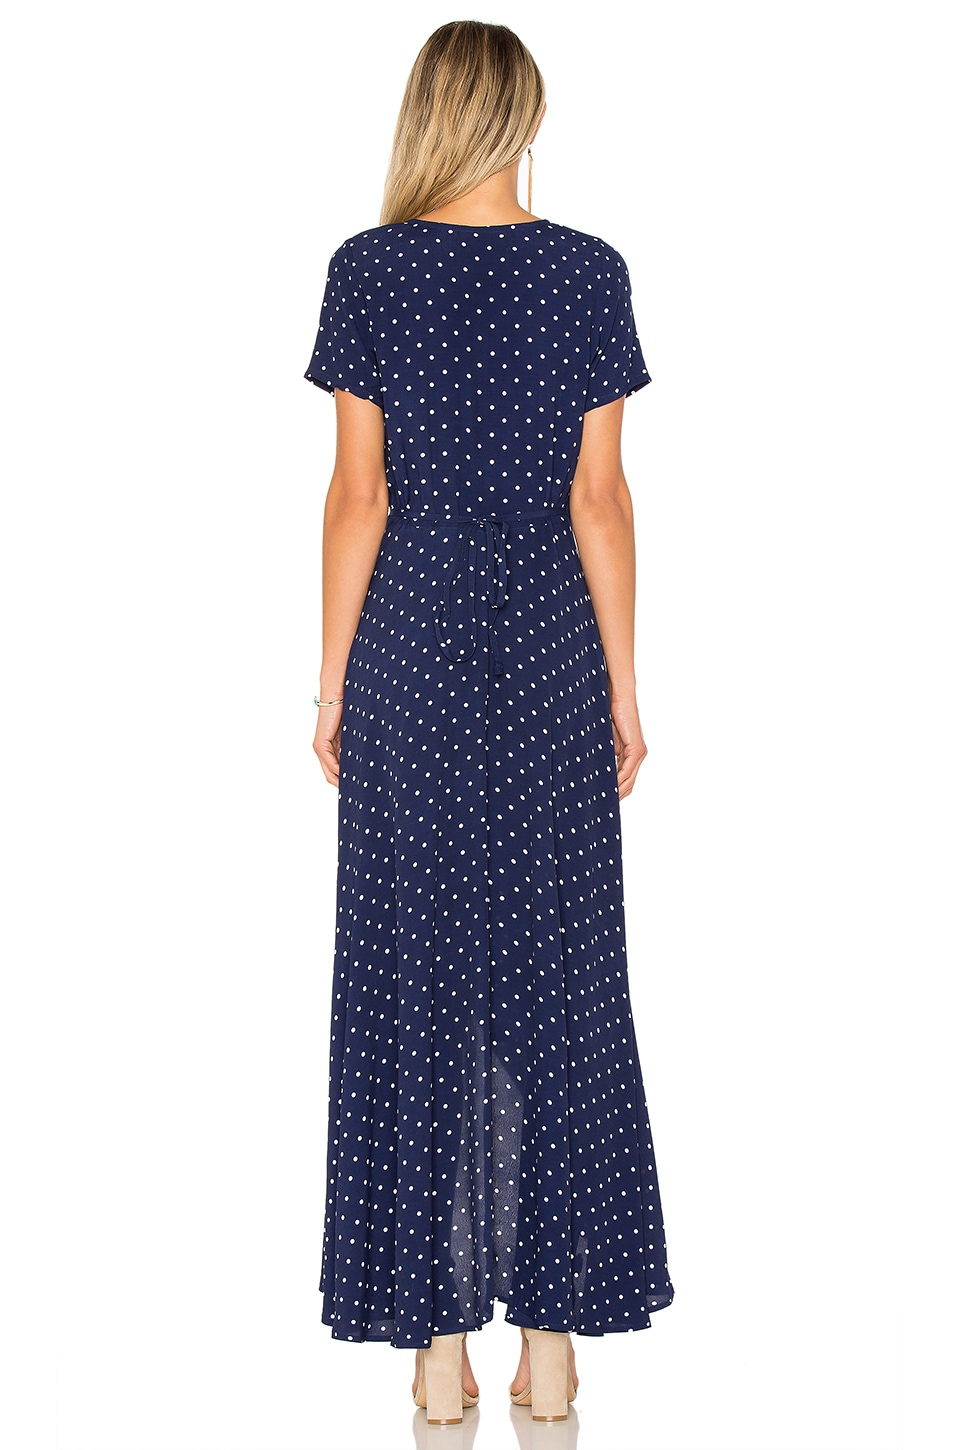 AUGUSTE Lily Wrap Maxi Dress Classic Polka Dot in Navy Blue | REVOLVE